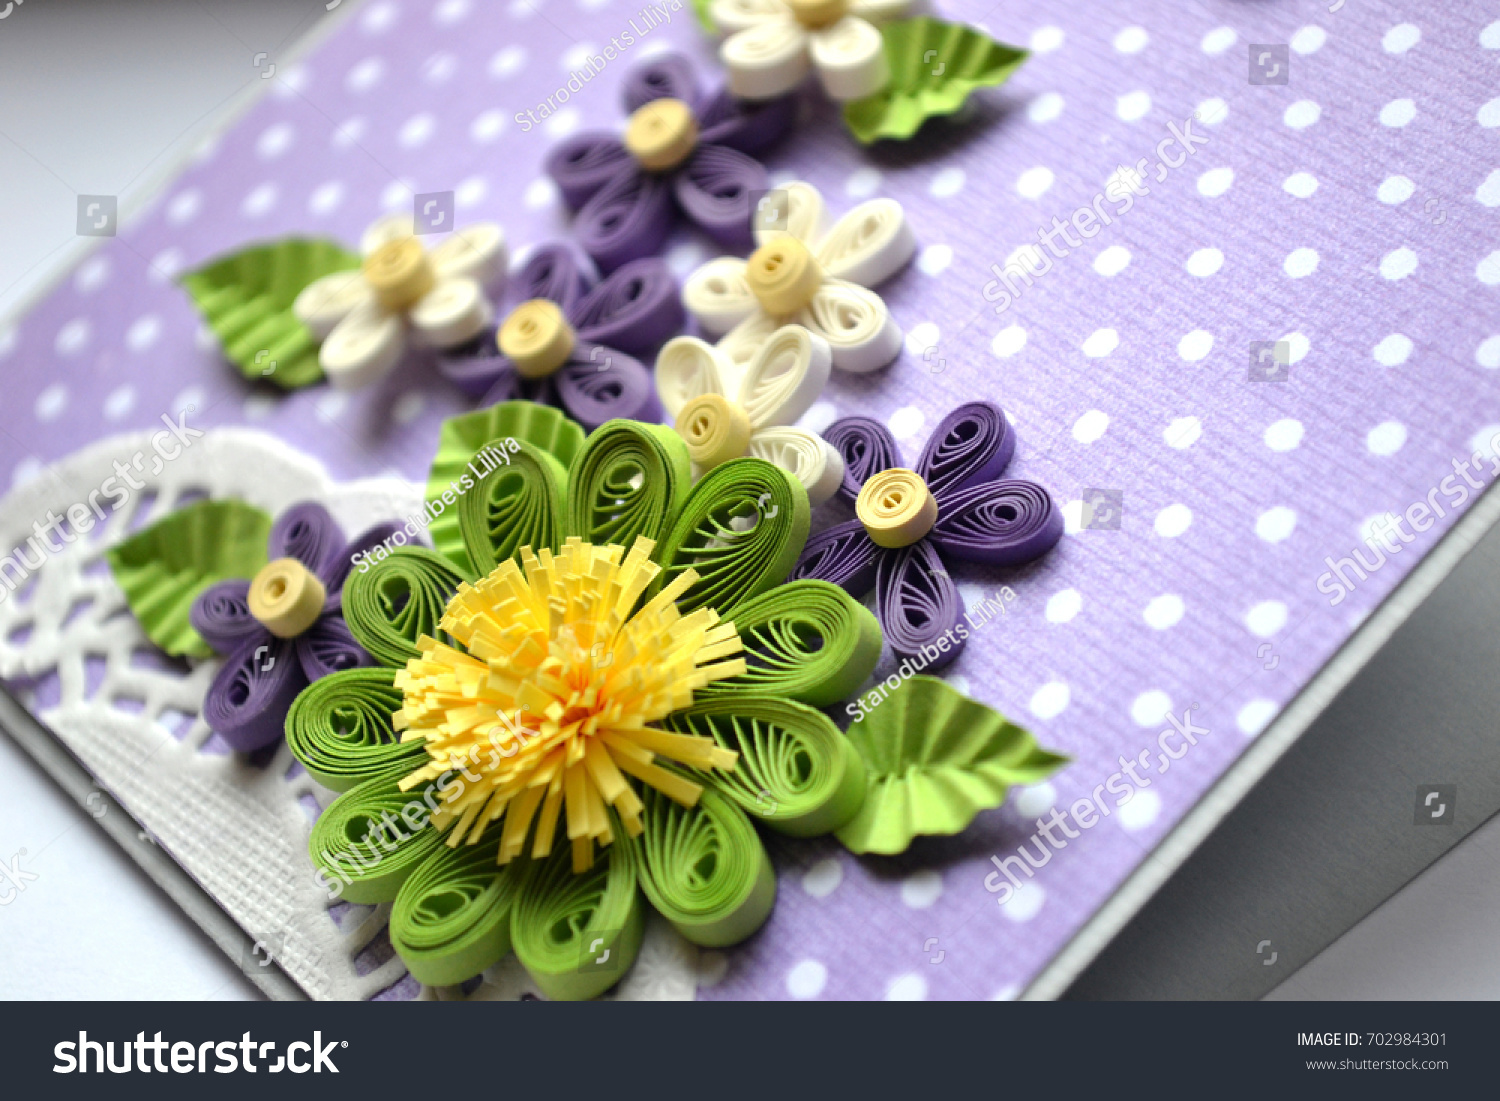 quilling flowers made paper card design stock photo (edit